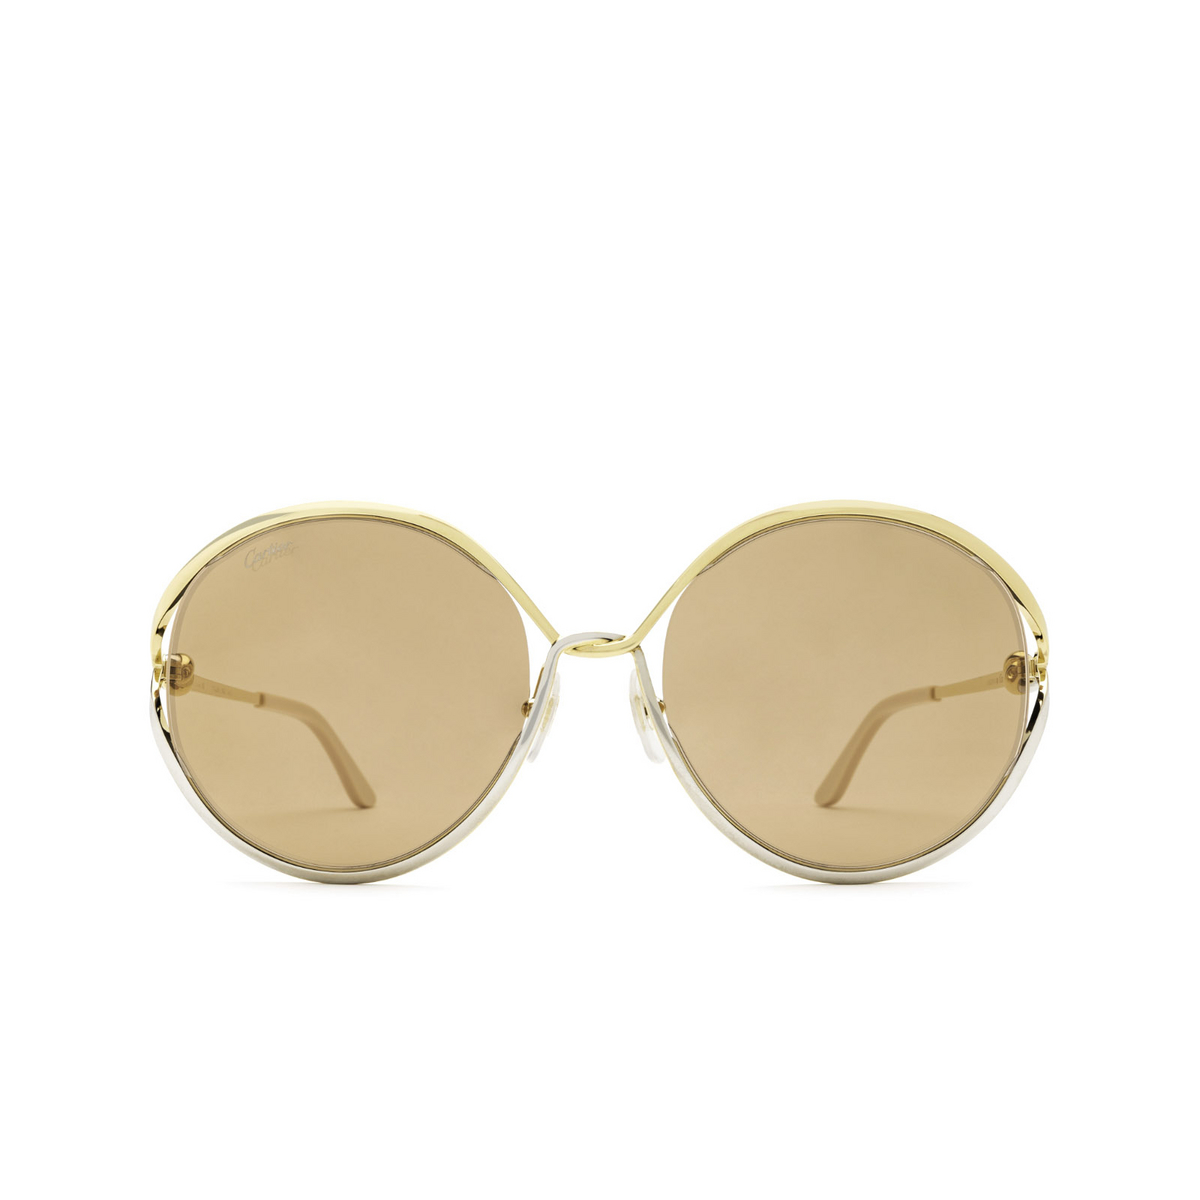 Cartier® Round Sunglasses: CT0226S color Gold 002 - front view.